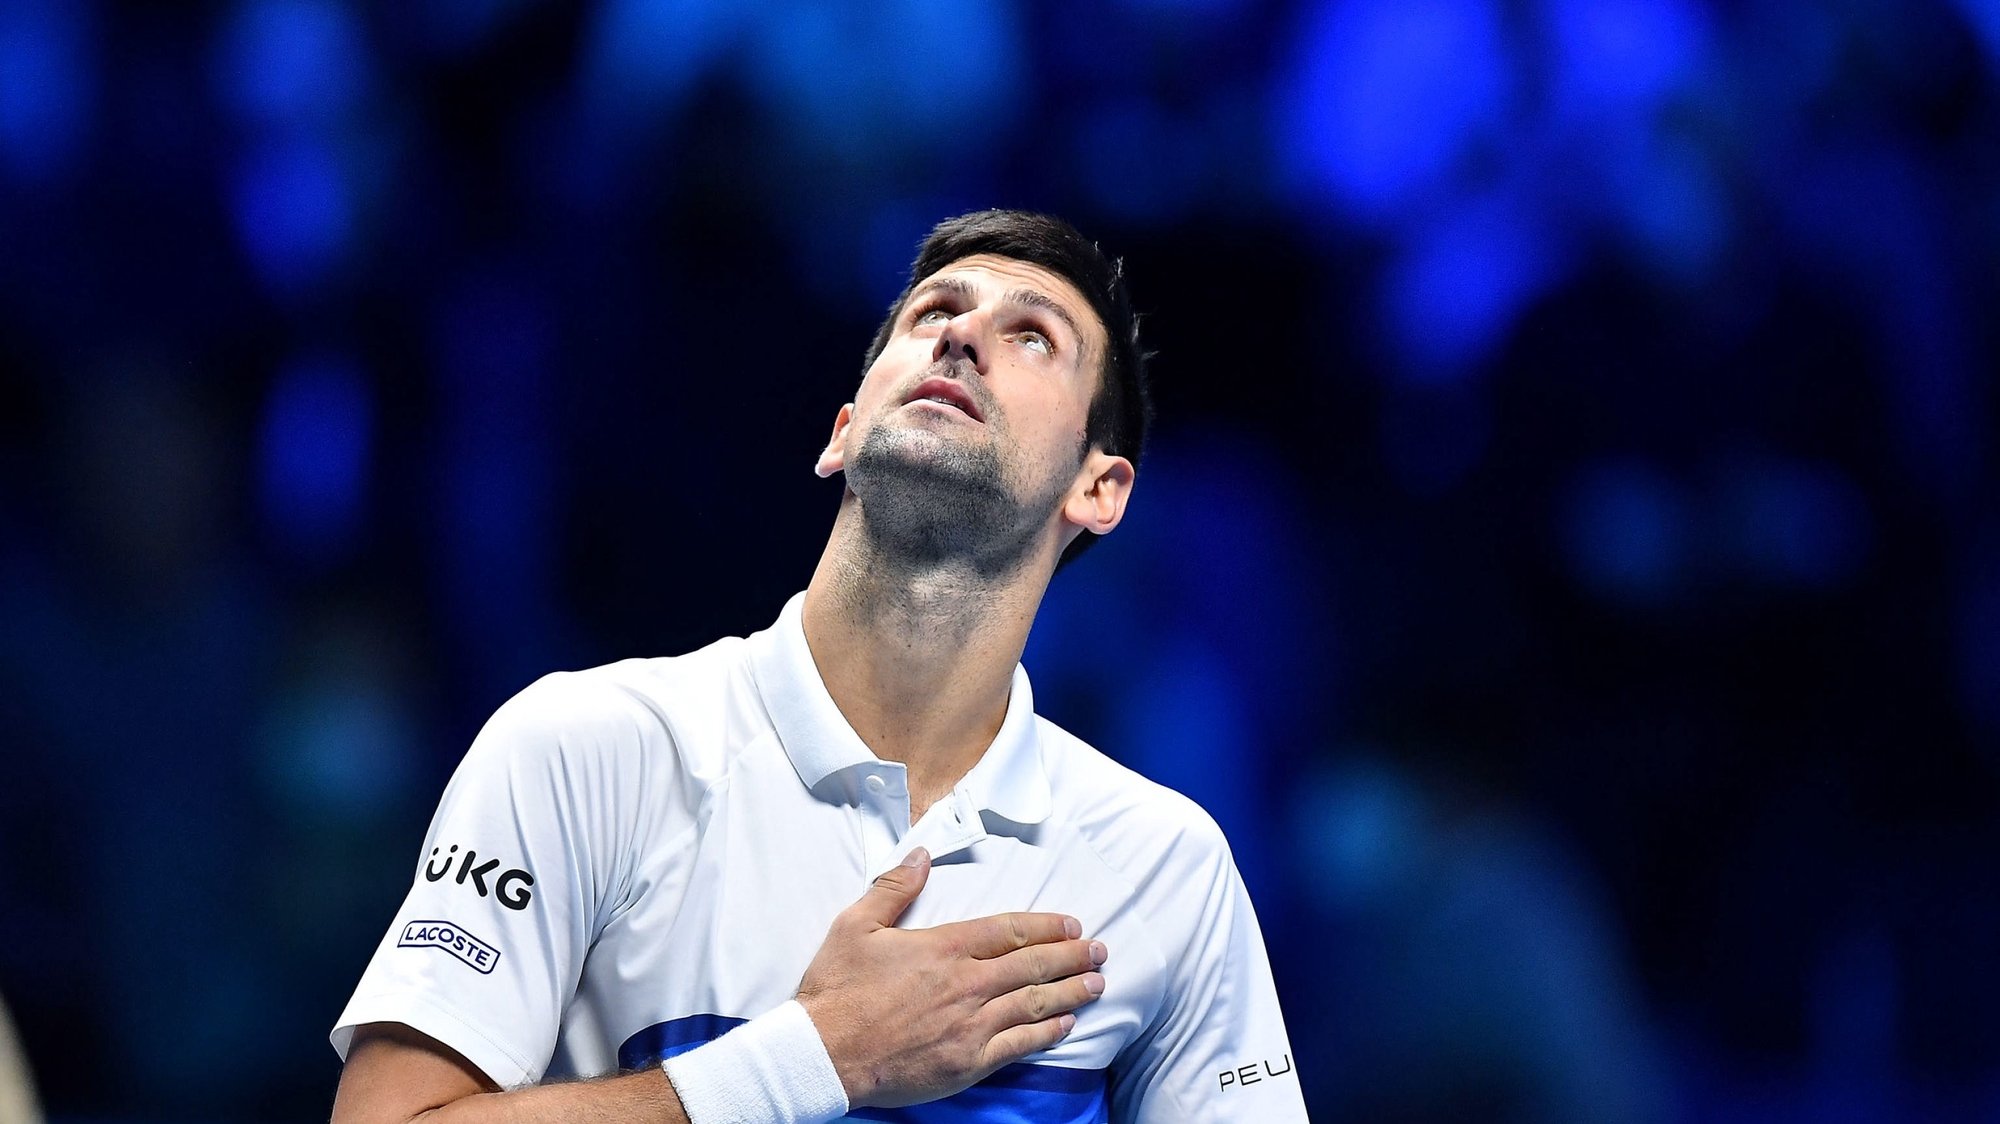 epa09688749 (FILE) - Novak Djokovic of Serbia reacts after defeating Casper Ruud of Norway in their group stage match of the Nitto ATP Finals tennis tournament in Turin, Italy, 15 November 2021 (reissued 16 January 2022). Djokovic lost court appeal against deportation from Australia and will not be able to defend his Australian Open title in Melbourne.  EPA/Alessandro Di Marco *** Local Caption *** 57295242